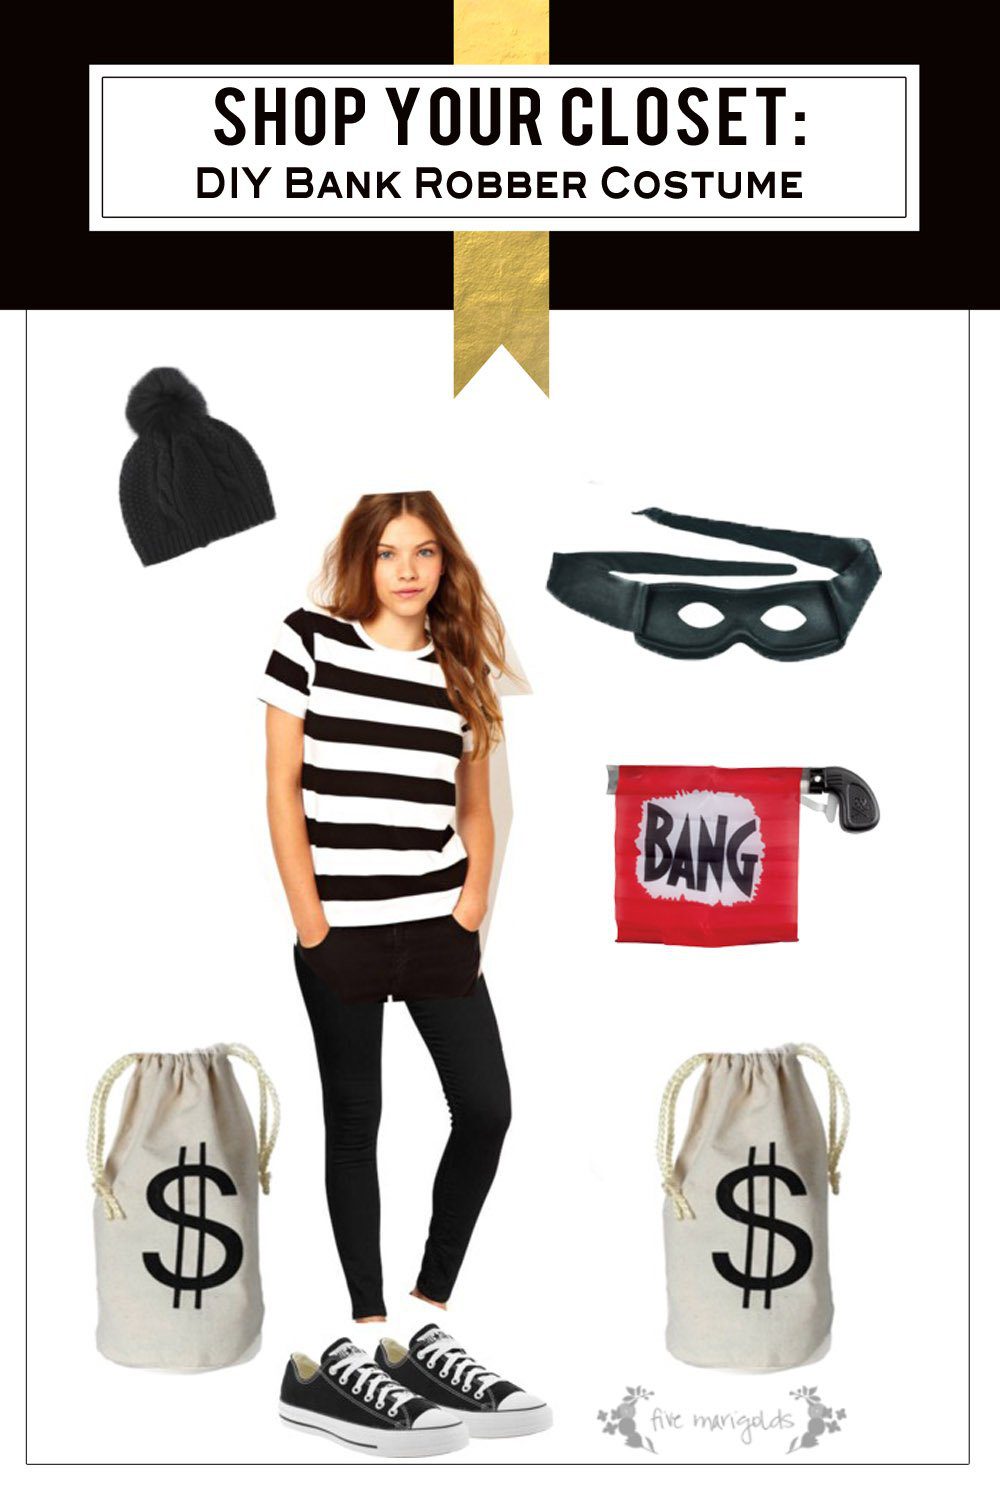 Shop your own closet for free and fabulous costumes this Halloween! Love this bank robber costume idea.